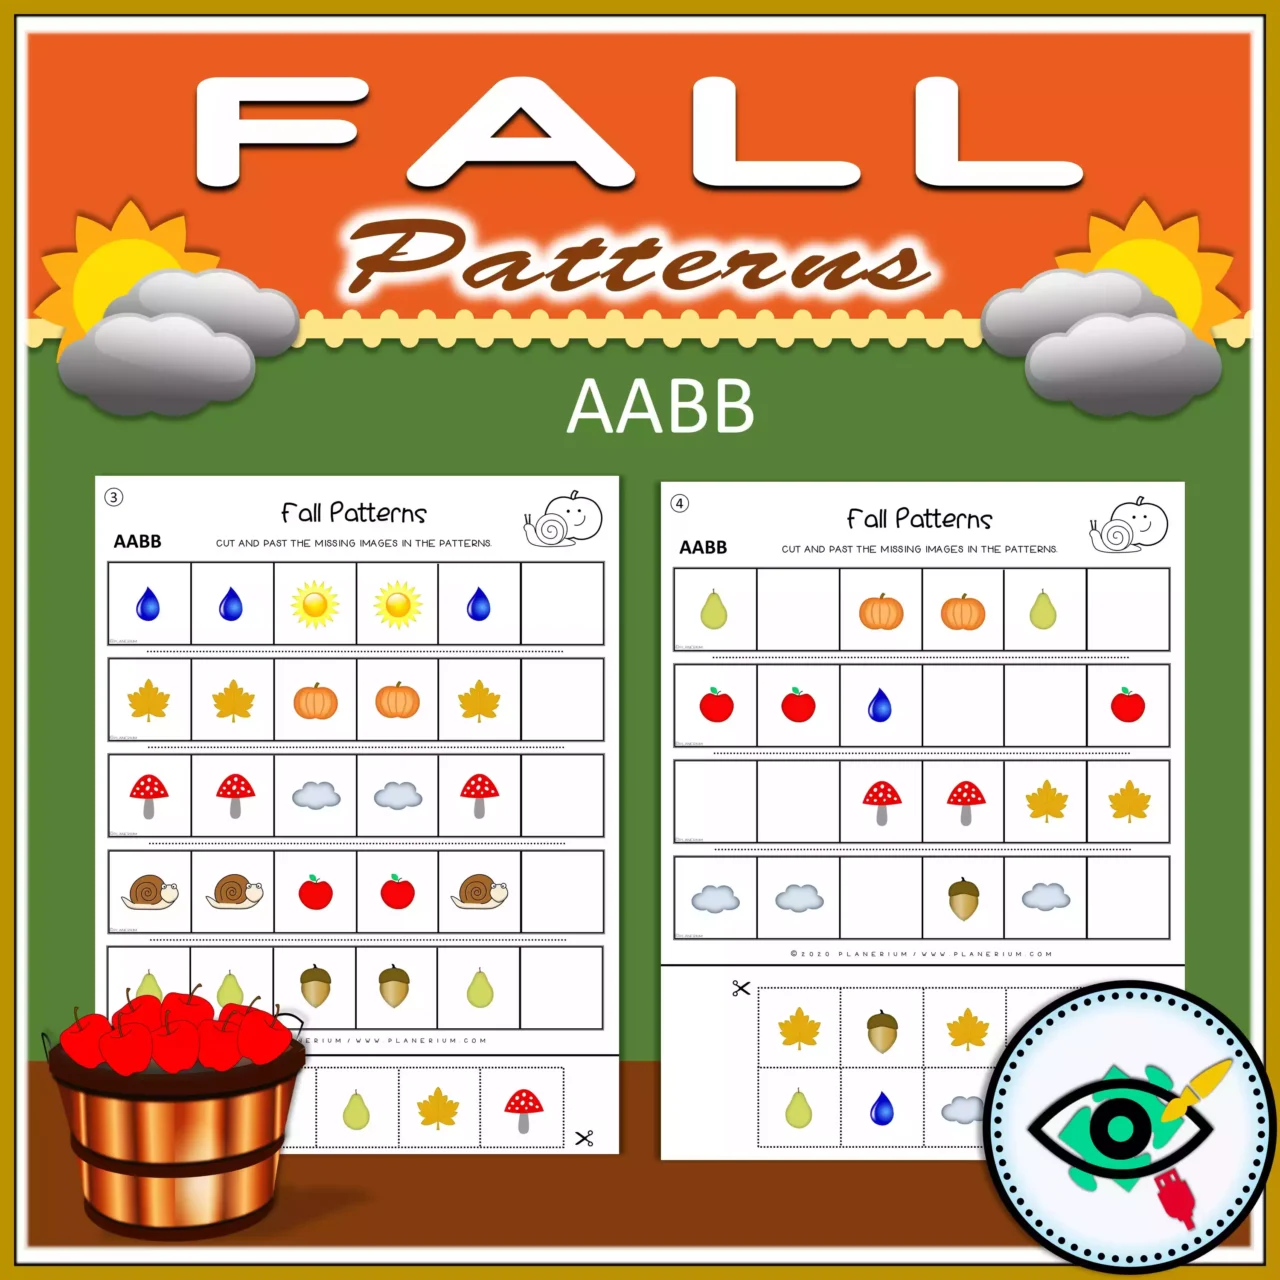 Fall - Patterns Activity - Image Title 3